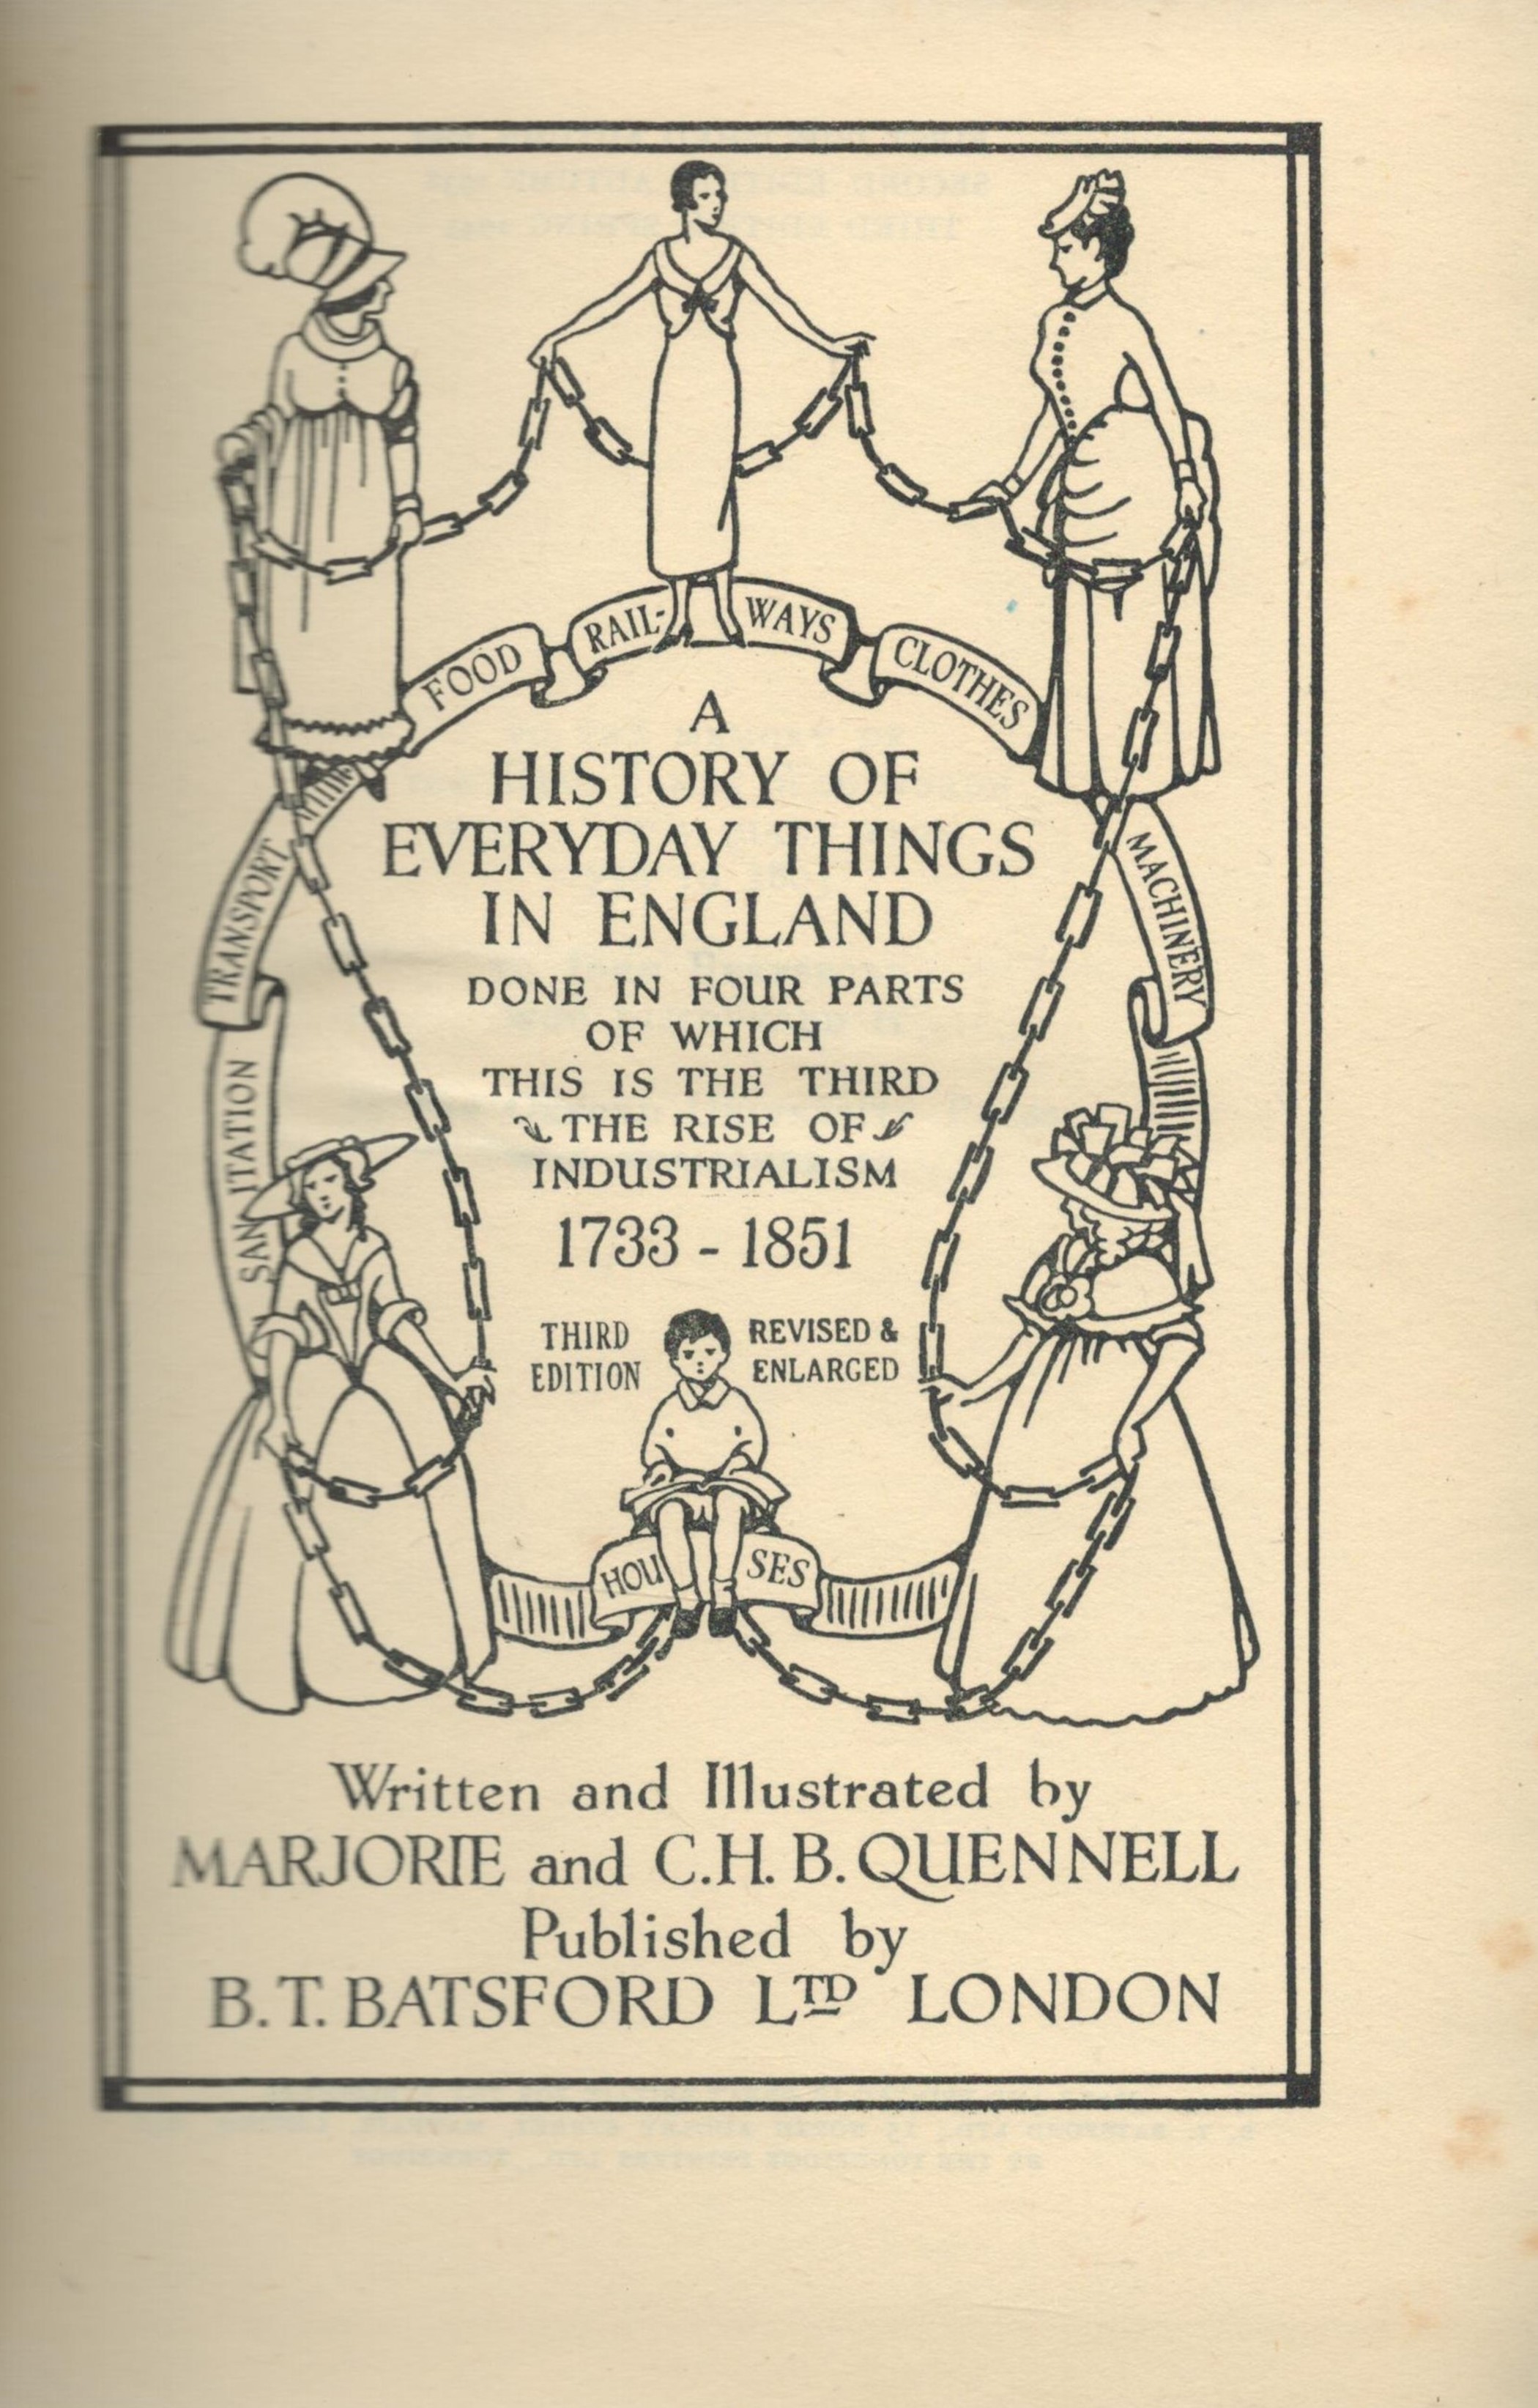 A History Of Everyday Things in England 1733 1942 by M and C H B Quennell 1945 Third Edition - Image 2 of 3